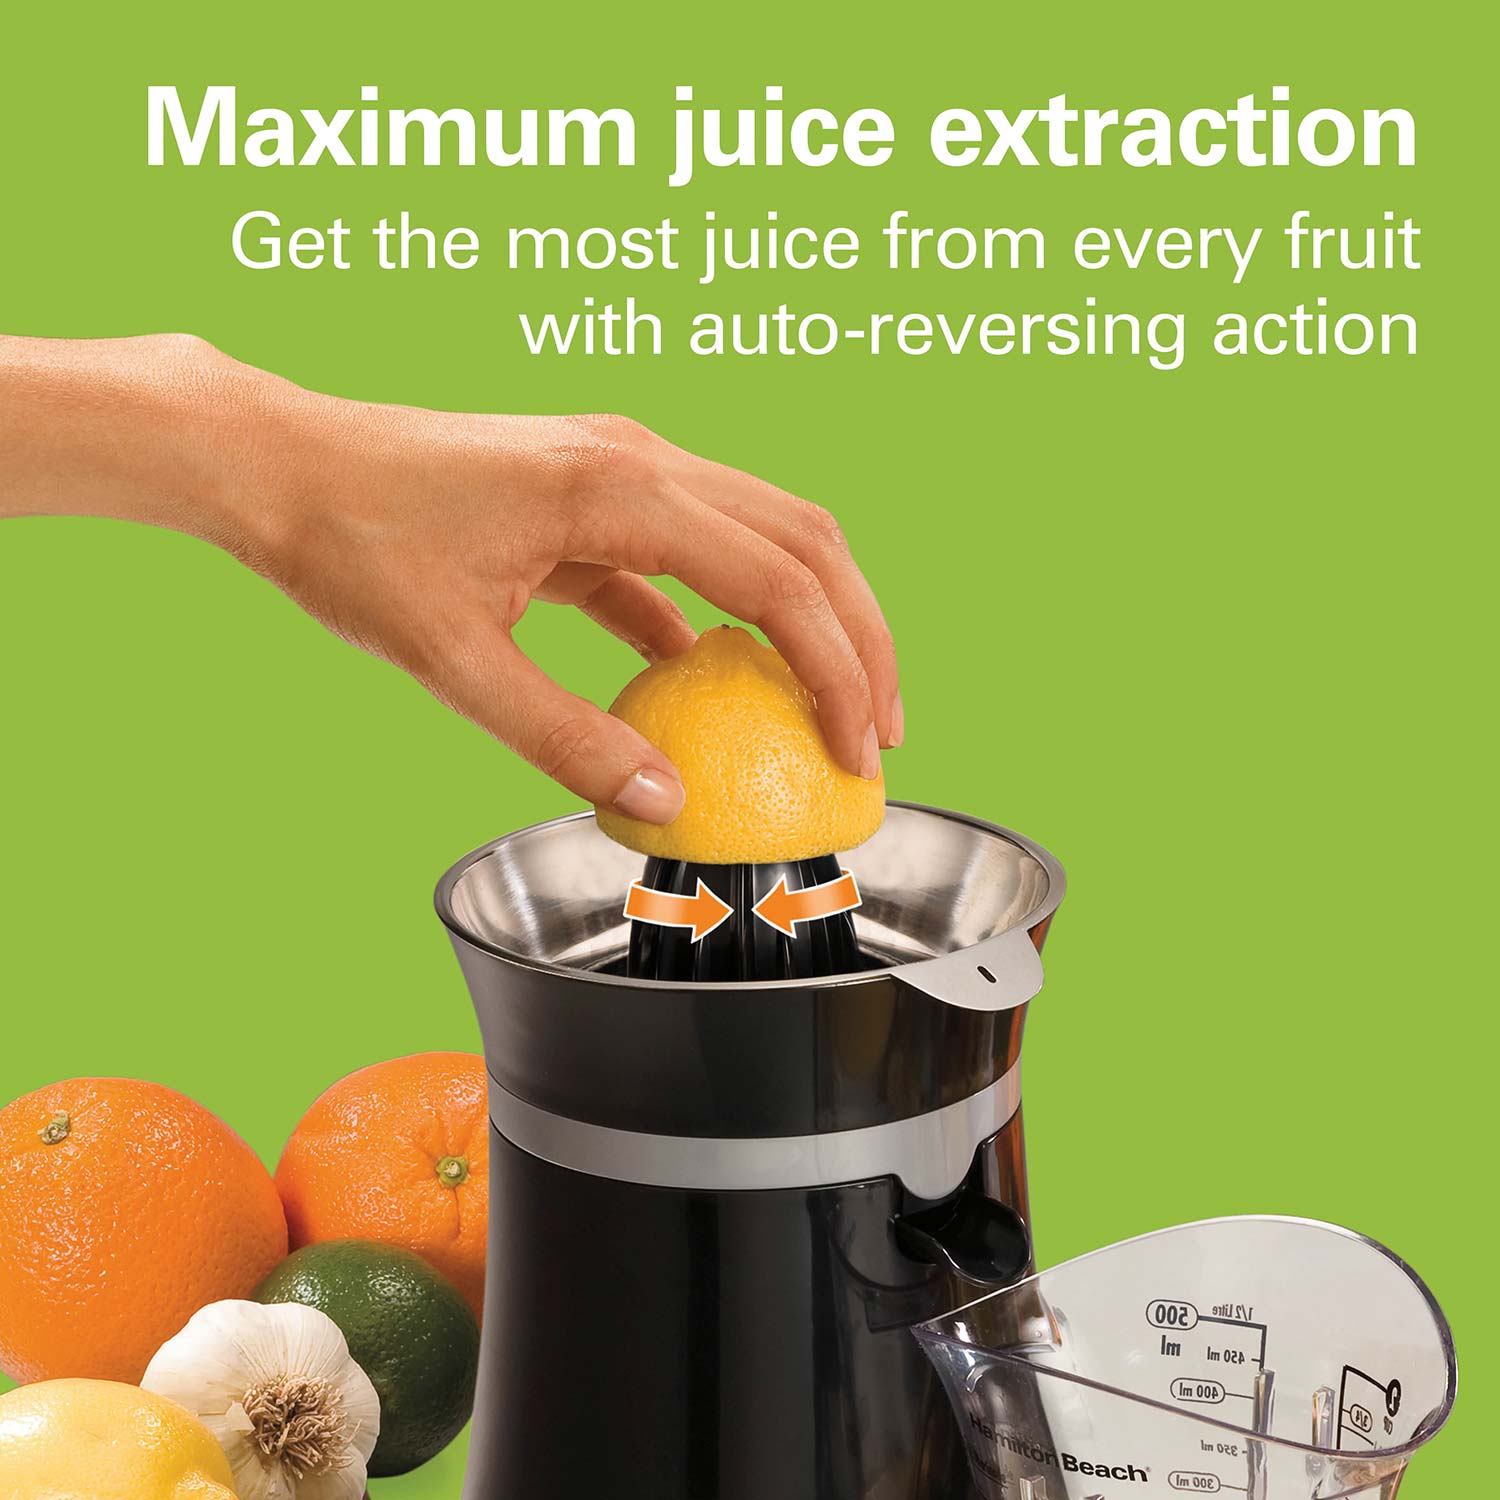 Hamilton Beach Big Mouth Juice Extractor - Shop Juicers & Reamers at H-E-B